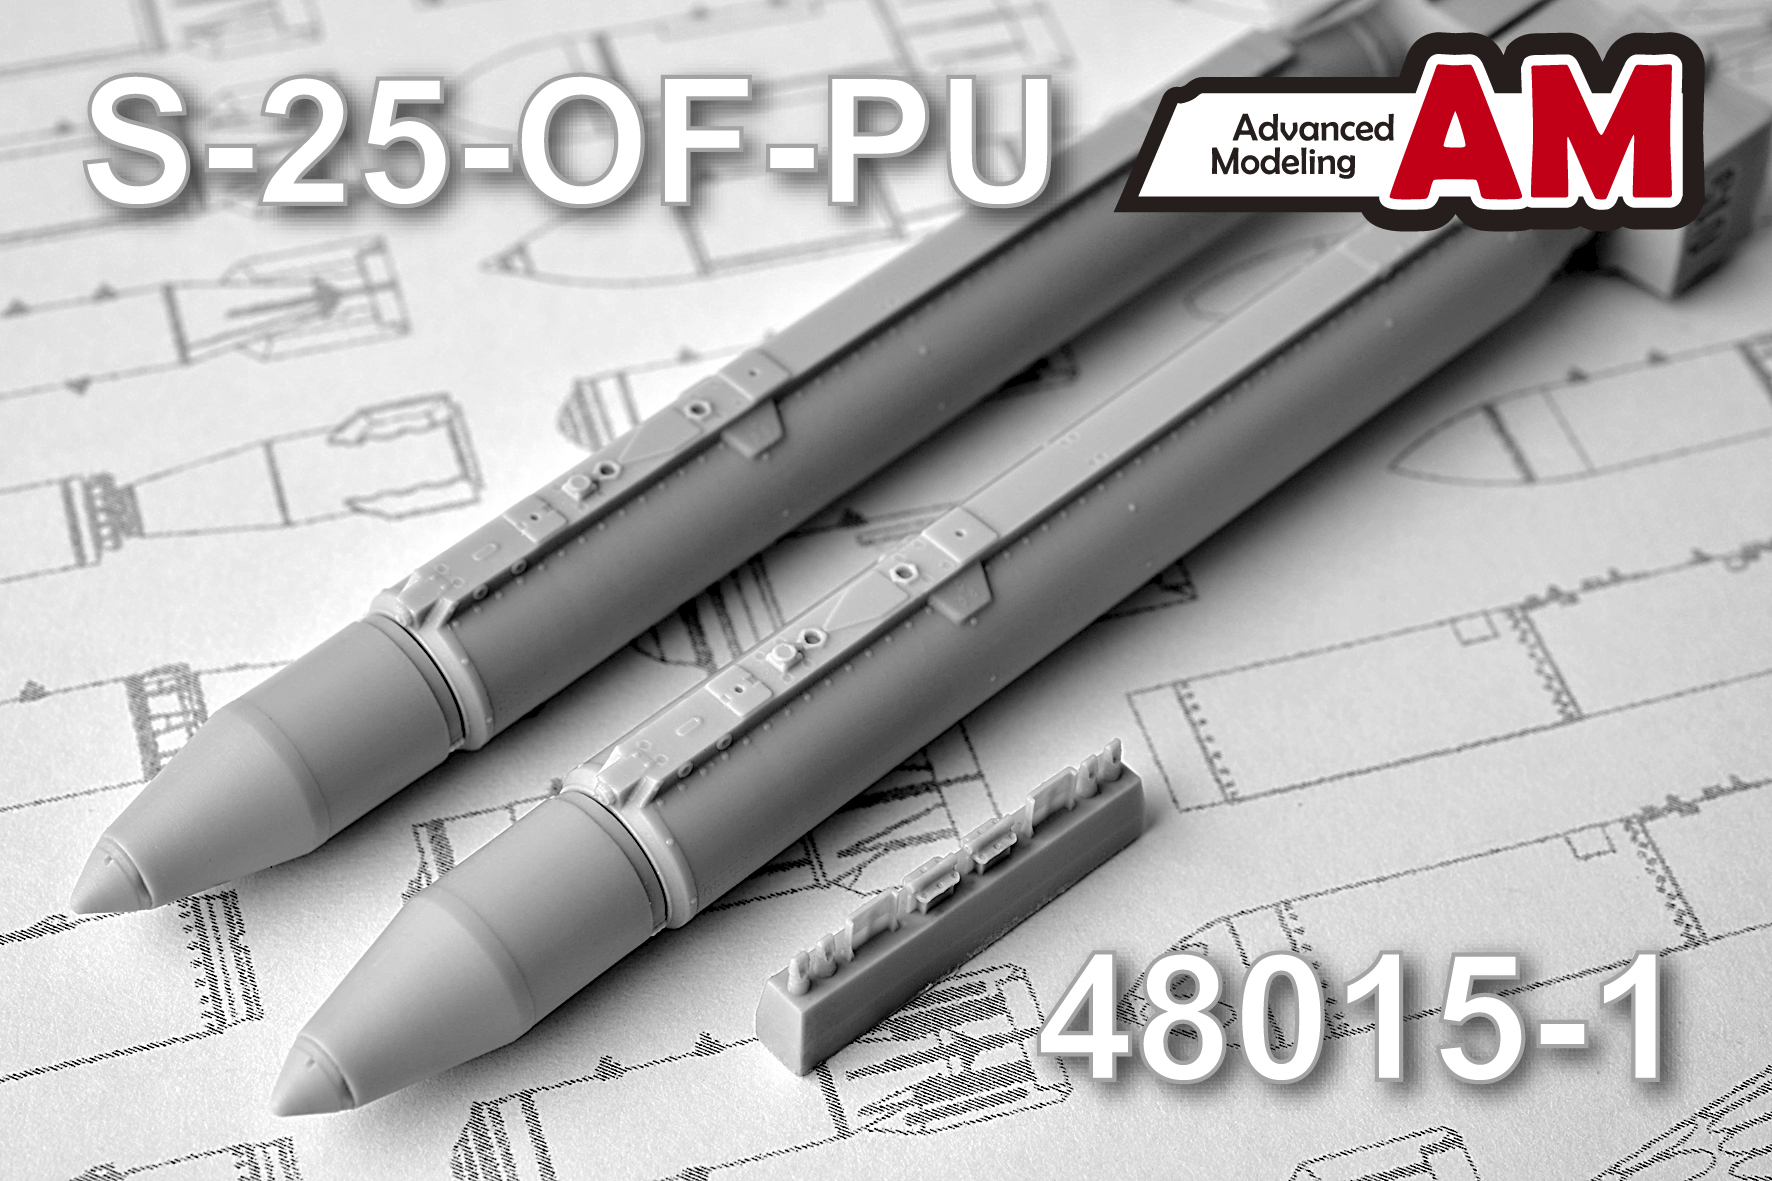 Additions (3D resin printing) 1/48 S-25-OF-PU Unguided Air-Launched Rocket (Advanced Modeling) 